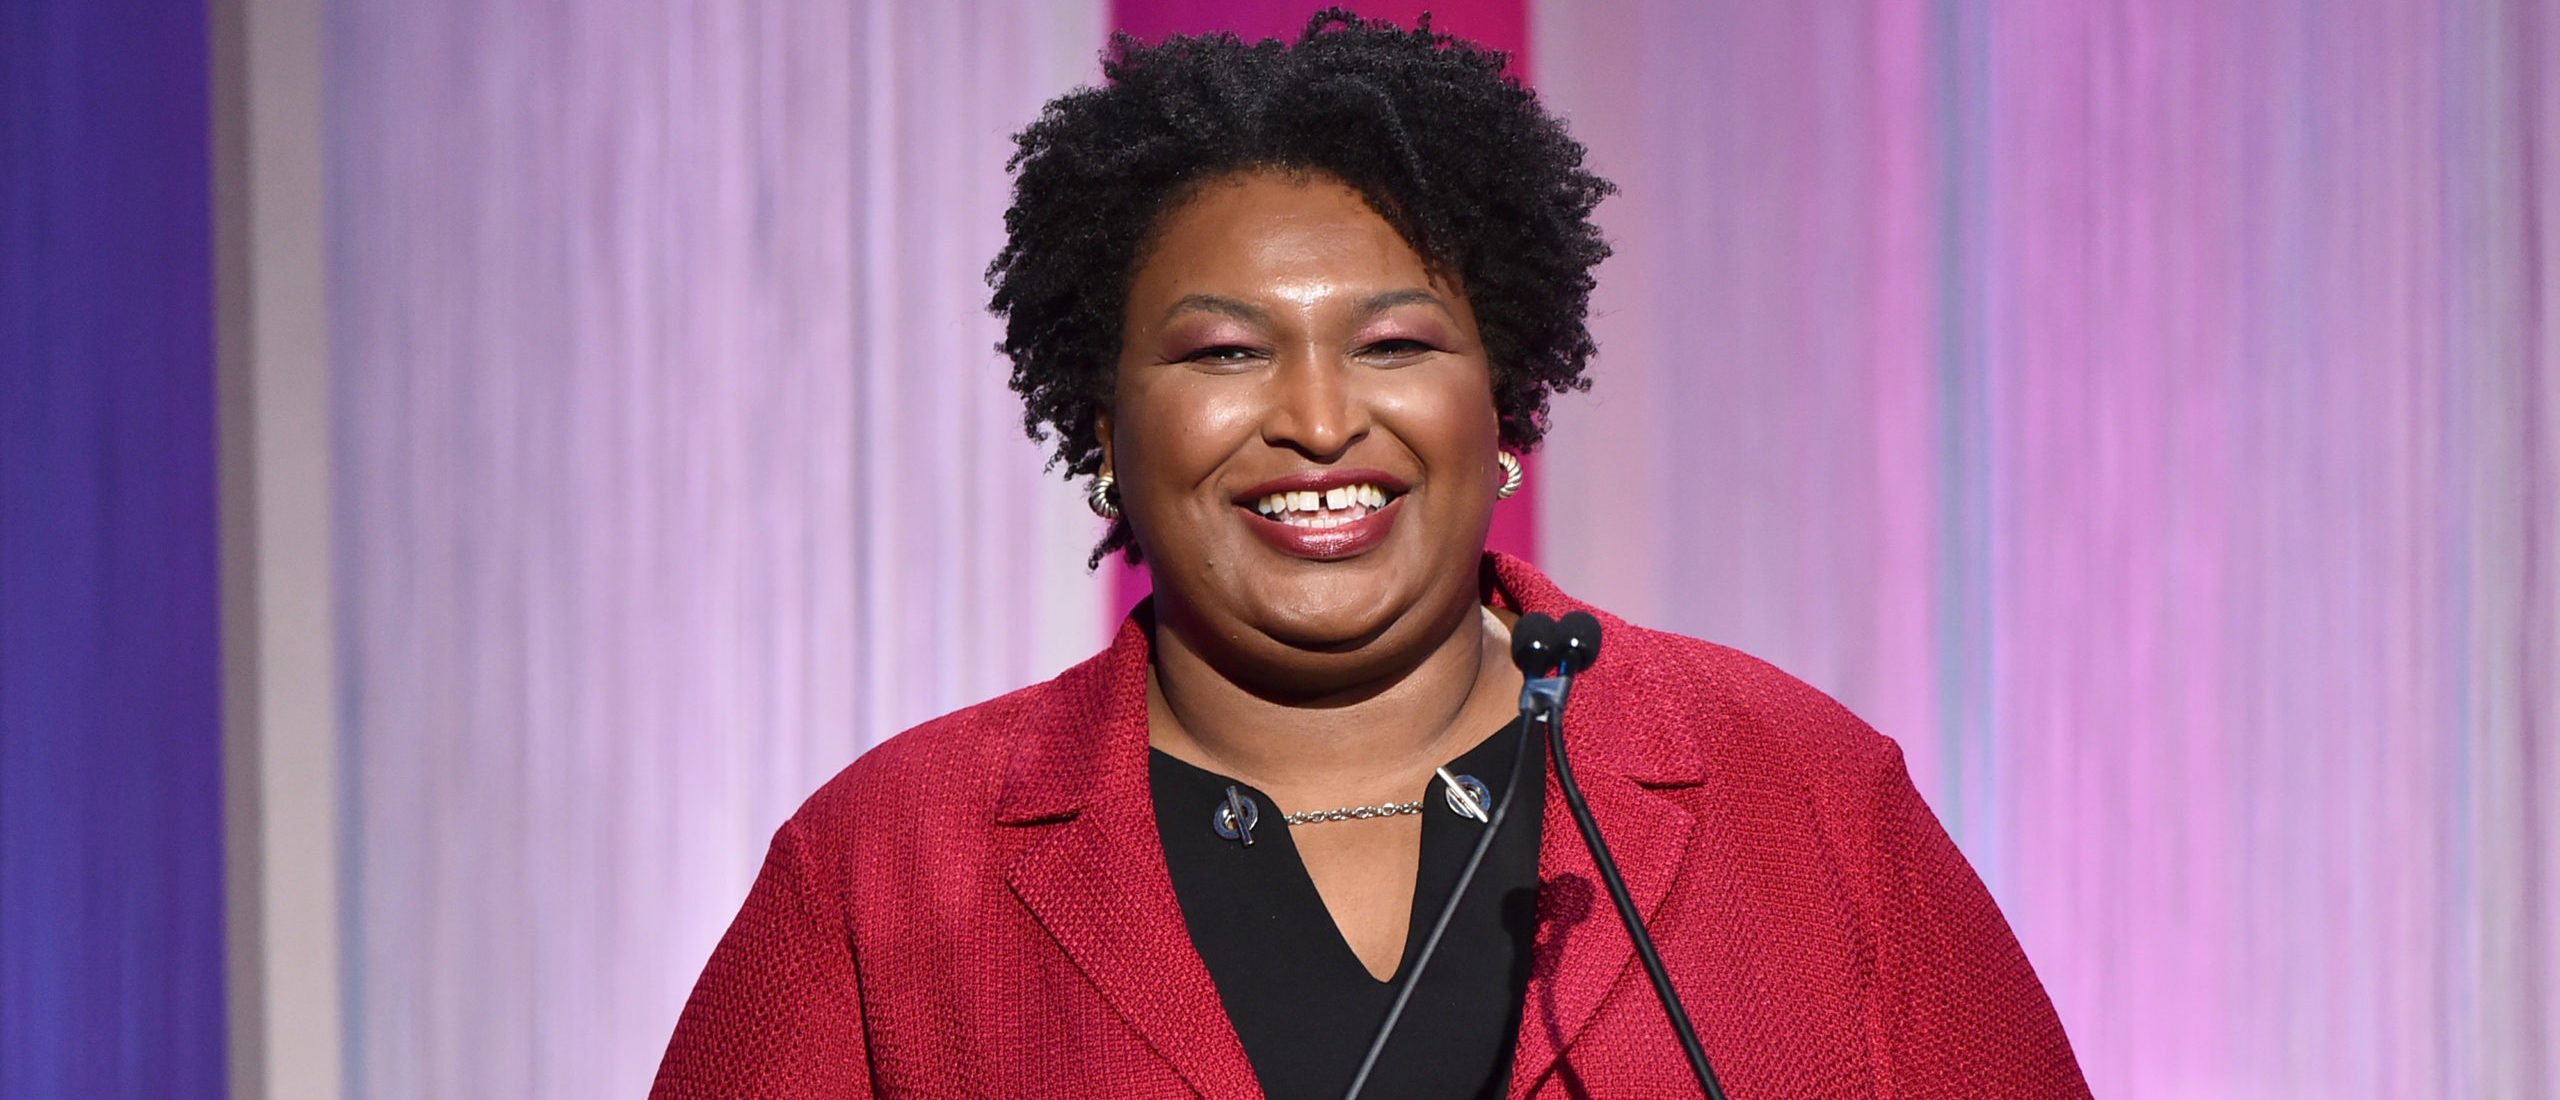 Stacey Abrams Purchased Two Homes Valued At $1.4 Million After Reporting Massive Debts In 2018 | The Daily Caller